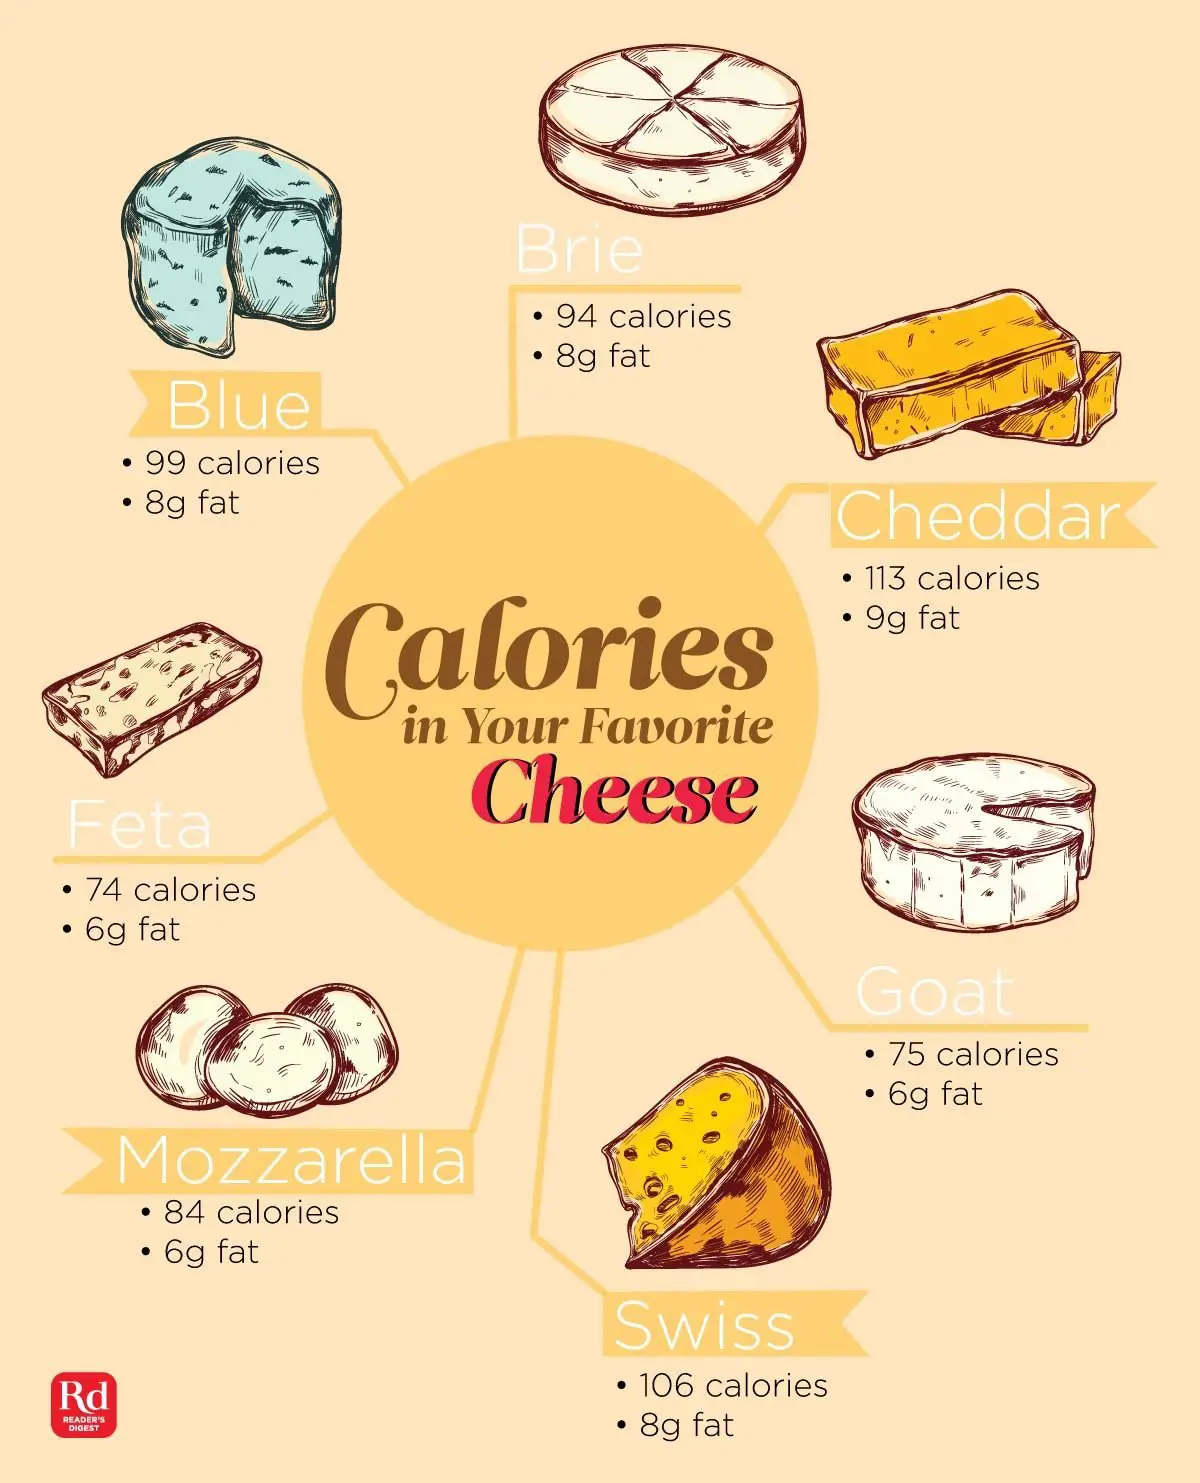 How Many Calories Are in Your Favorite Cheese?